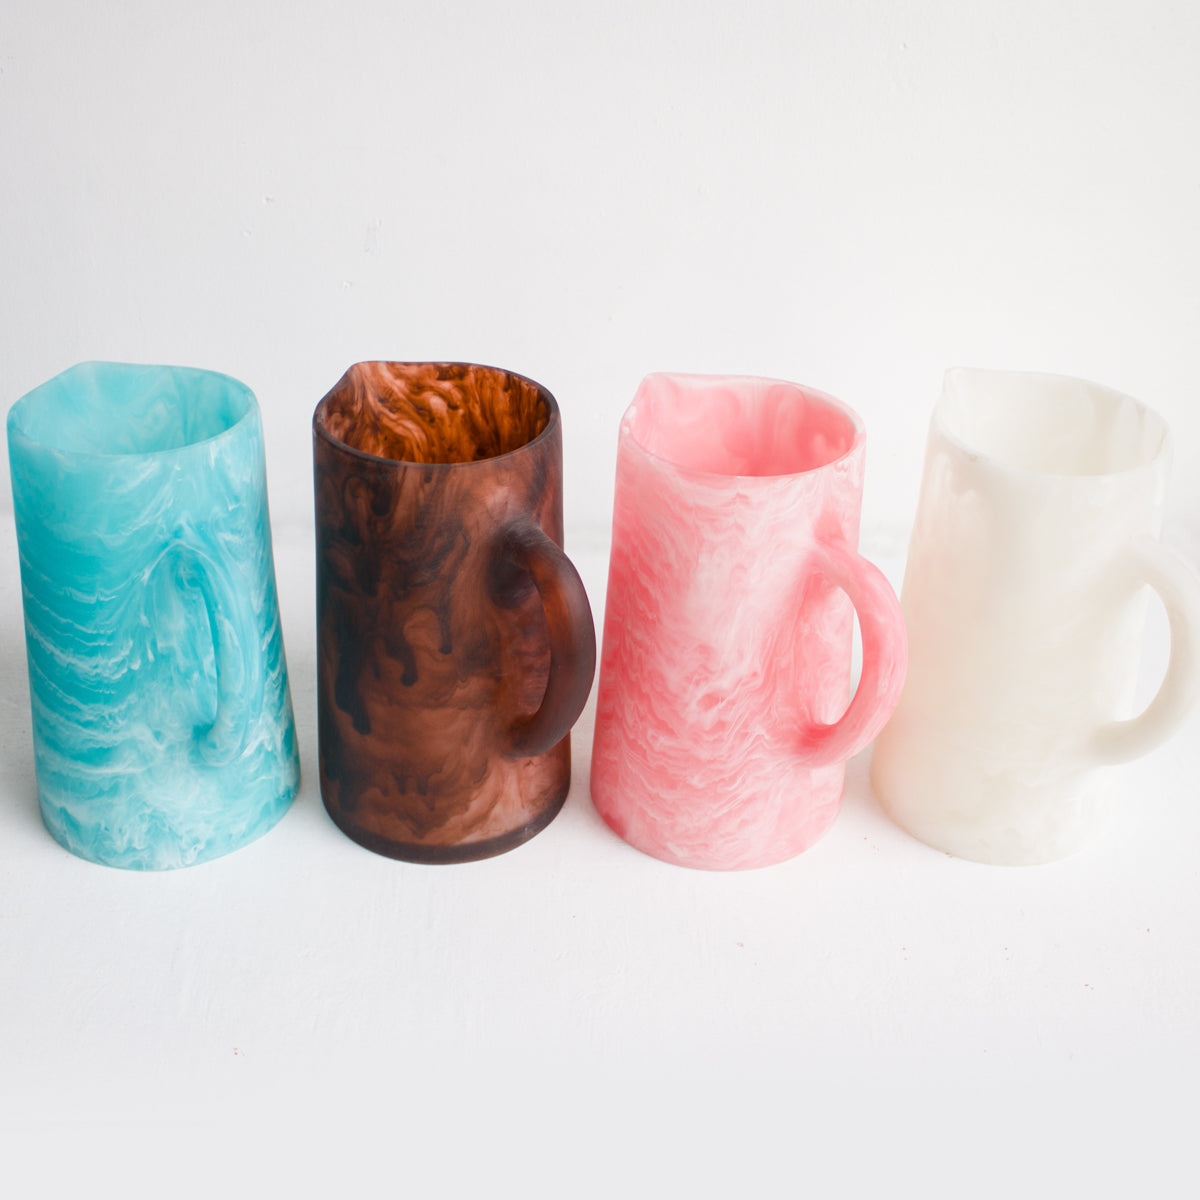 Resin Pitcher - Copper Brown